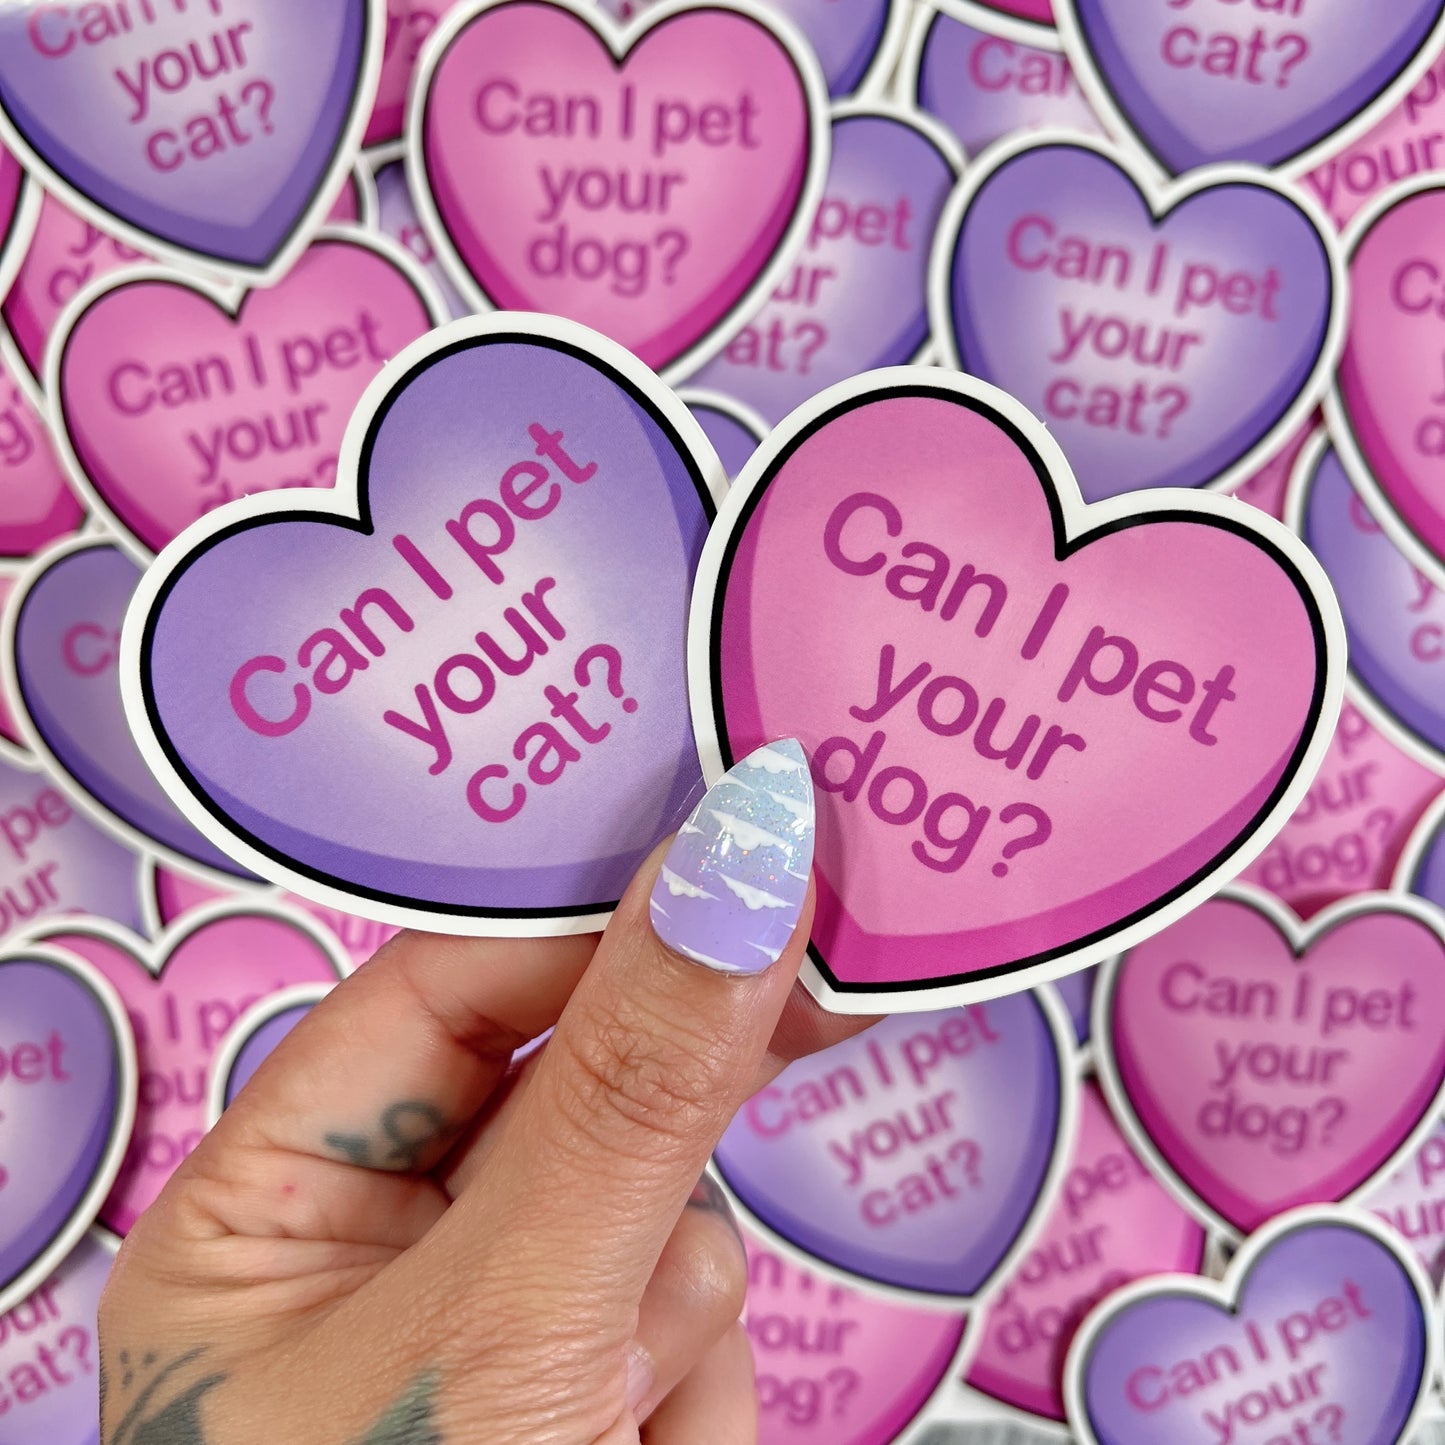 Can I pet your dog/cat? - Sticker